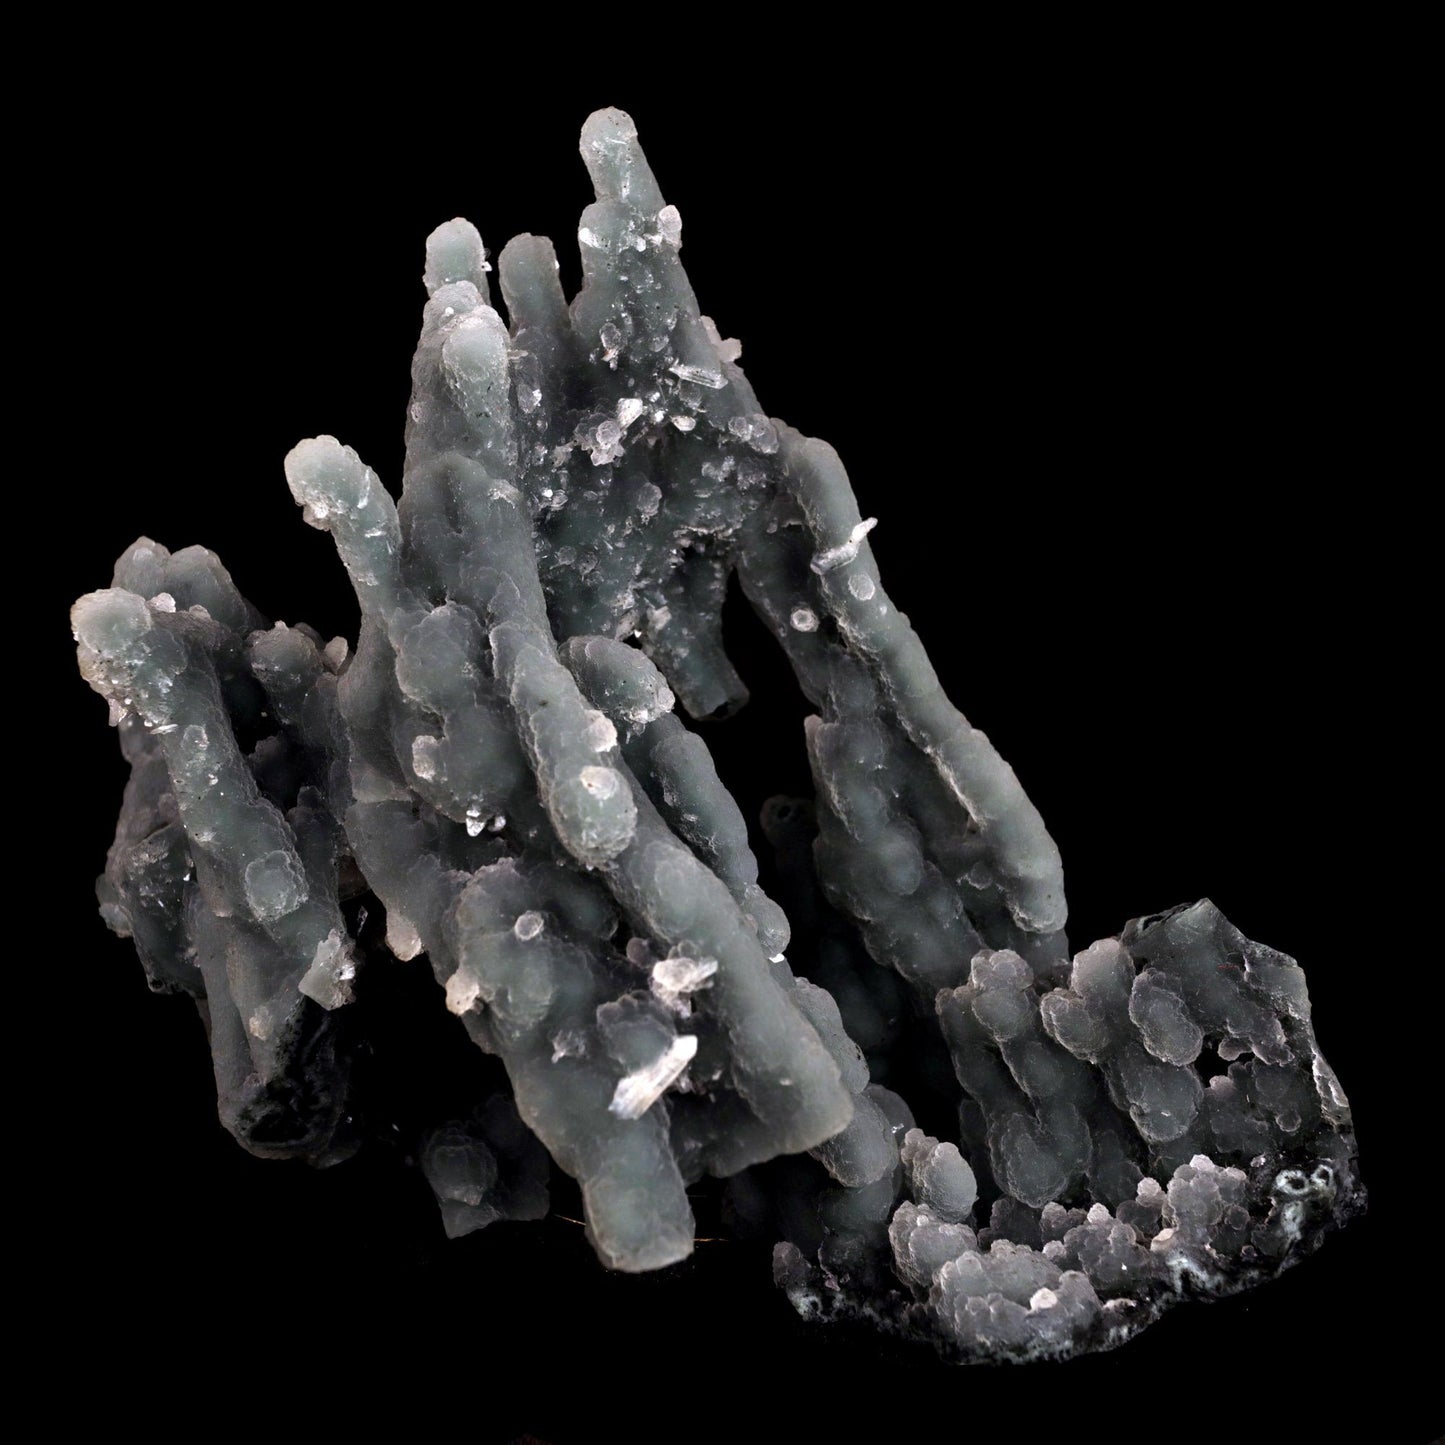 Chalcedony Coral Natural Mineral Specimen # B 4830  https://www.superbminerals.us/products/chalcedony-coral-natural-mineral-specimen-b-4830  Features: Magnificent specimen of delicate Chalcedony stalactites. The Chalcedony elongated structure is amazing. The stalactites are complete all over, colorless with milky white inclusions in the center, very sparkling and frosty. Many of them are doubly terminated. The Chalcedony stalactites are very lustrous